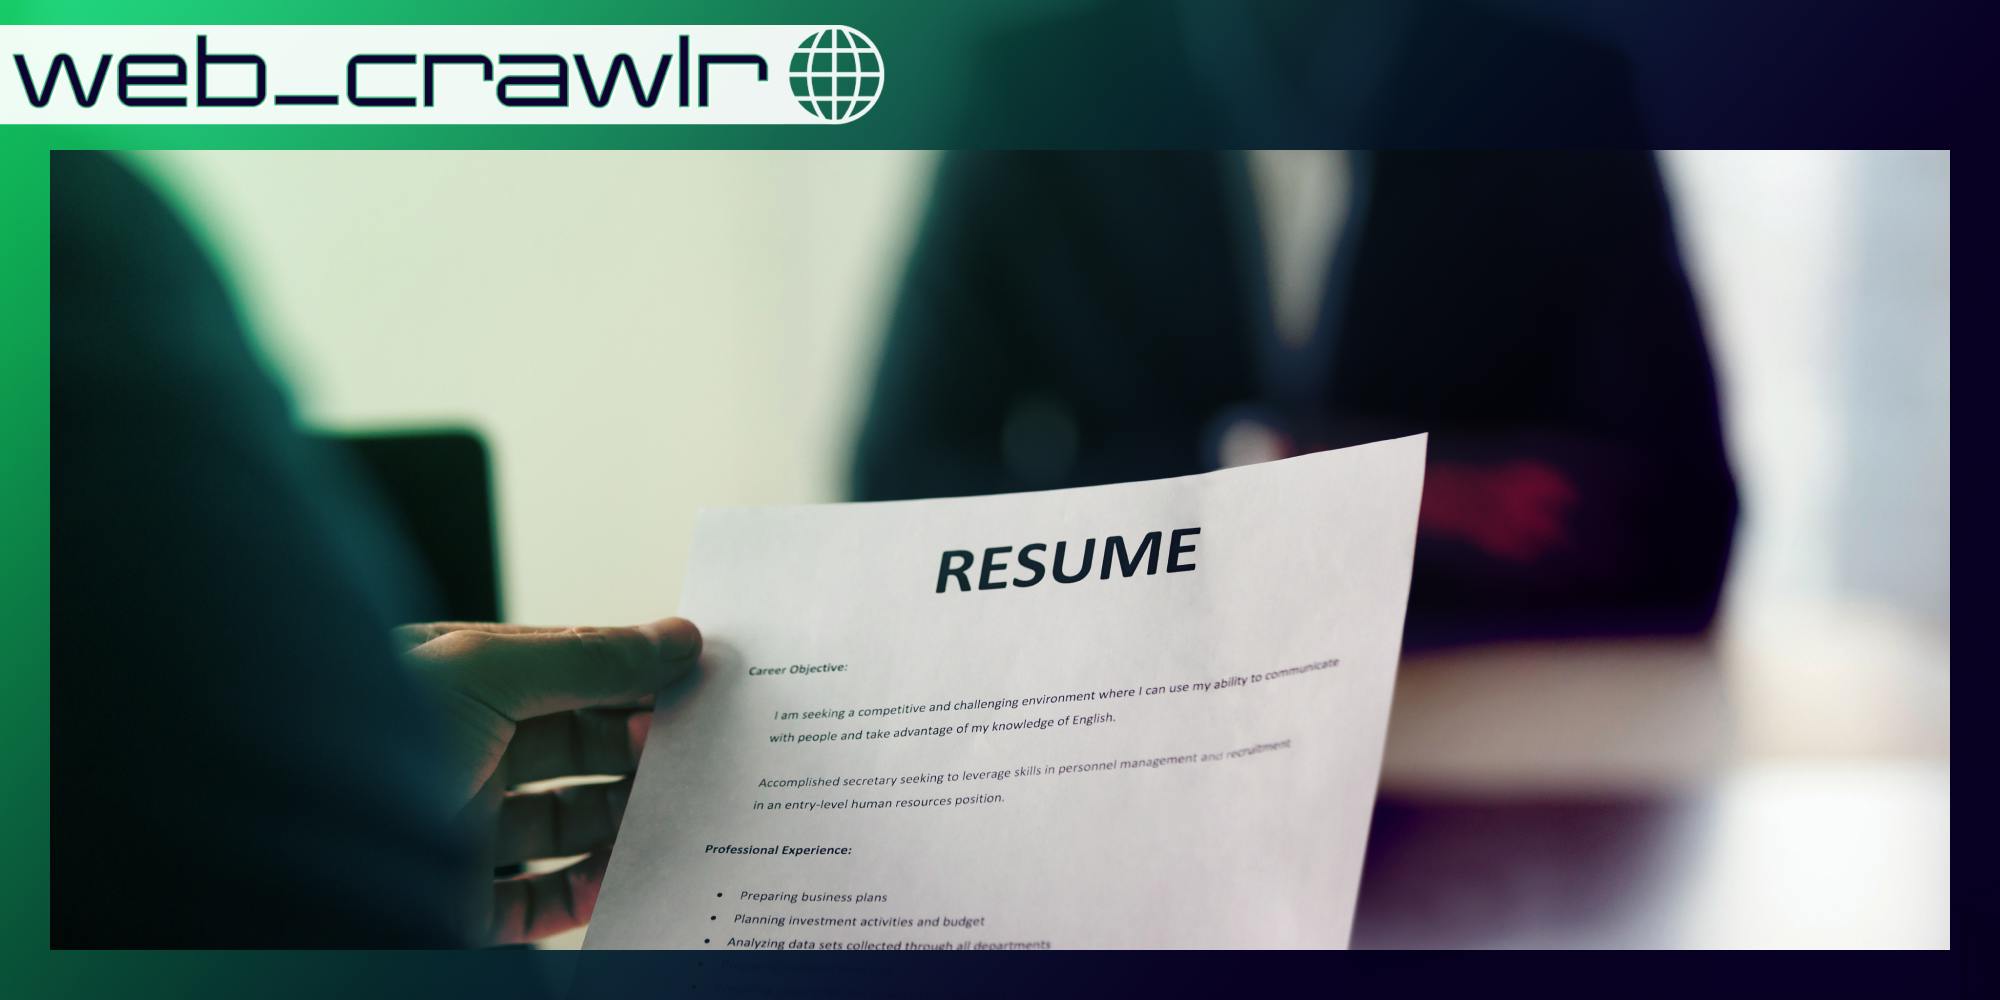 A person in a job interview holding a resume. The Daily Dot newsletter web_crawlr logo is in the top left corner.